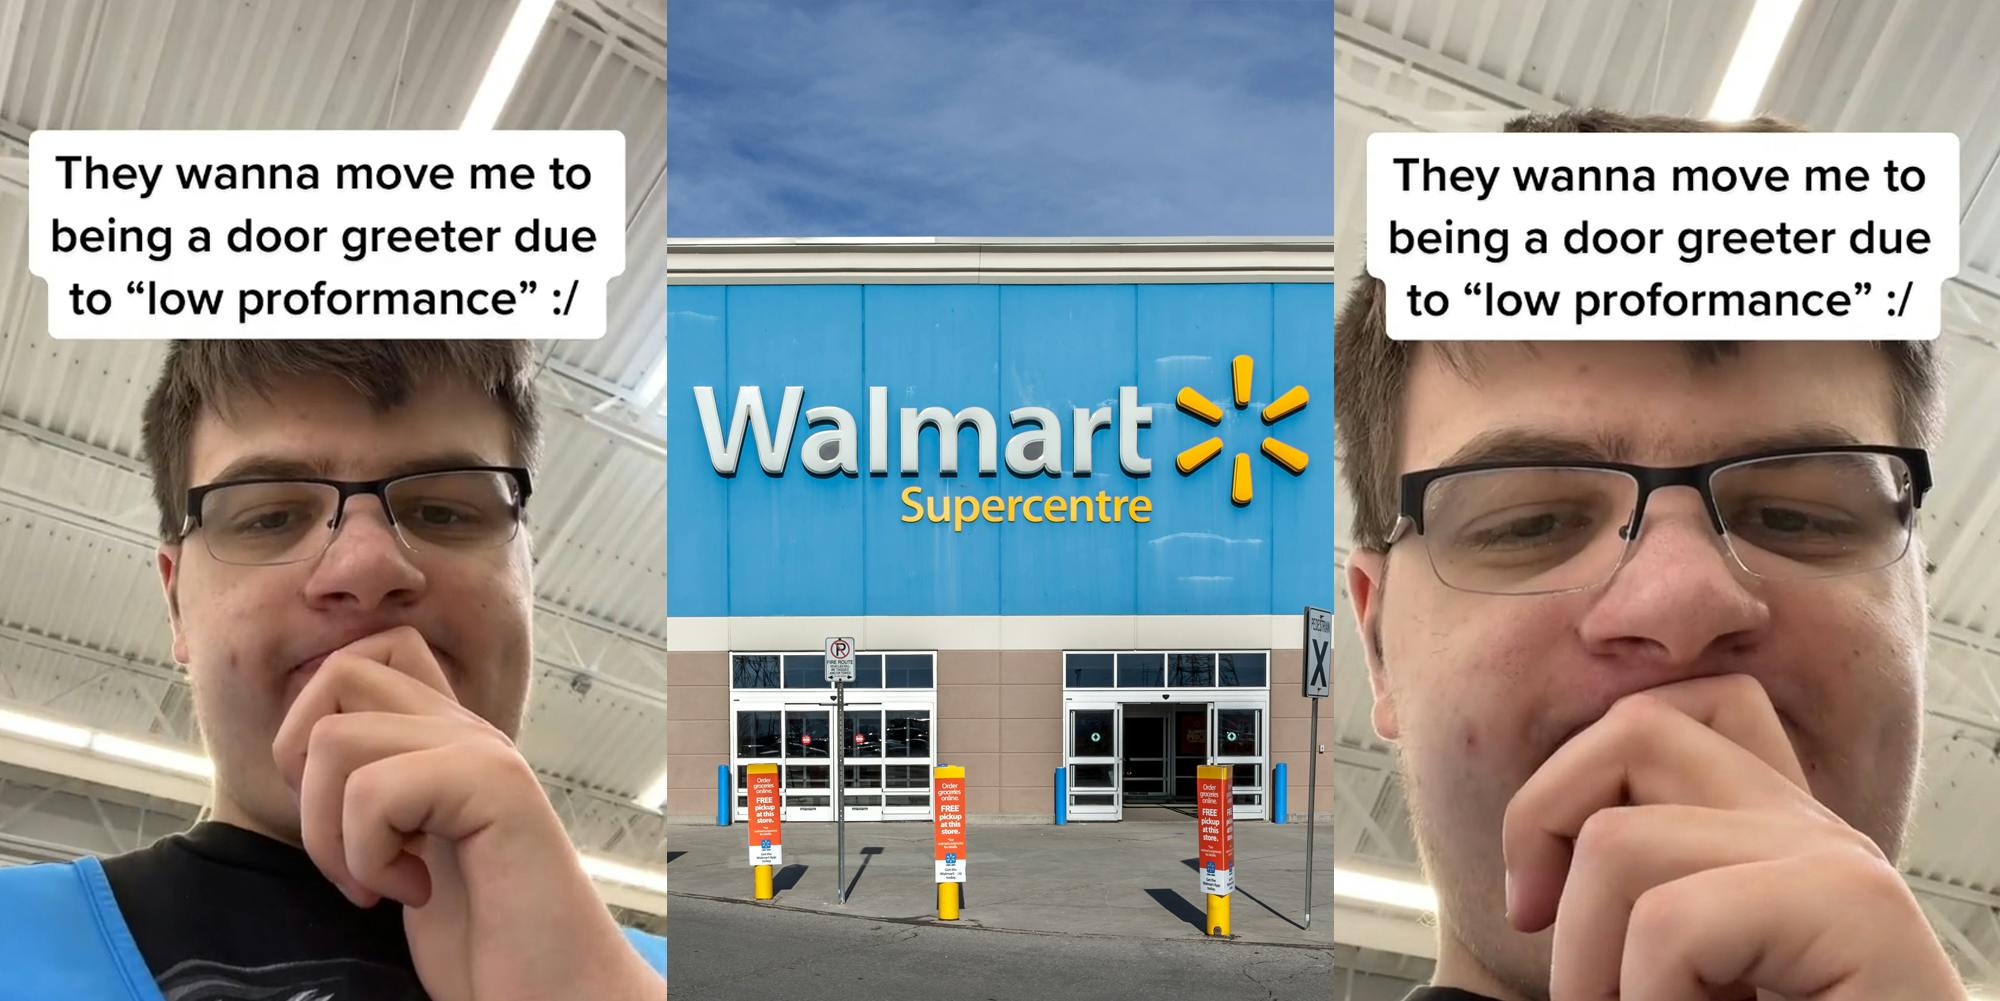 Walmart employee with caption "They wanna move me to being a door greeter due to "low performance" :/" (l) Walmart building with sign and storm clouds (c) Walmart employee with caption "They wanna move me to being a door greeter due to "low performance" :/" (r)